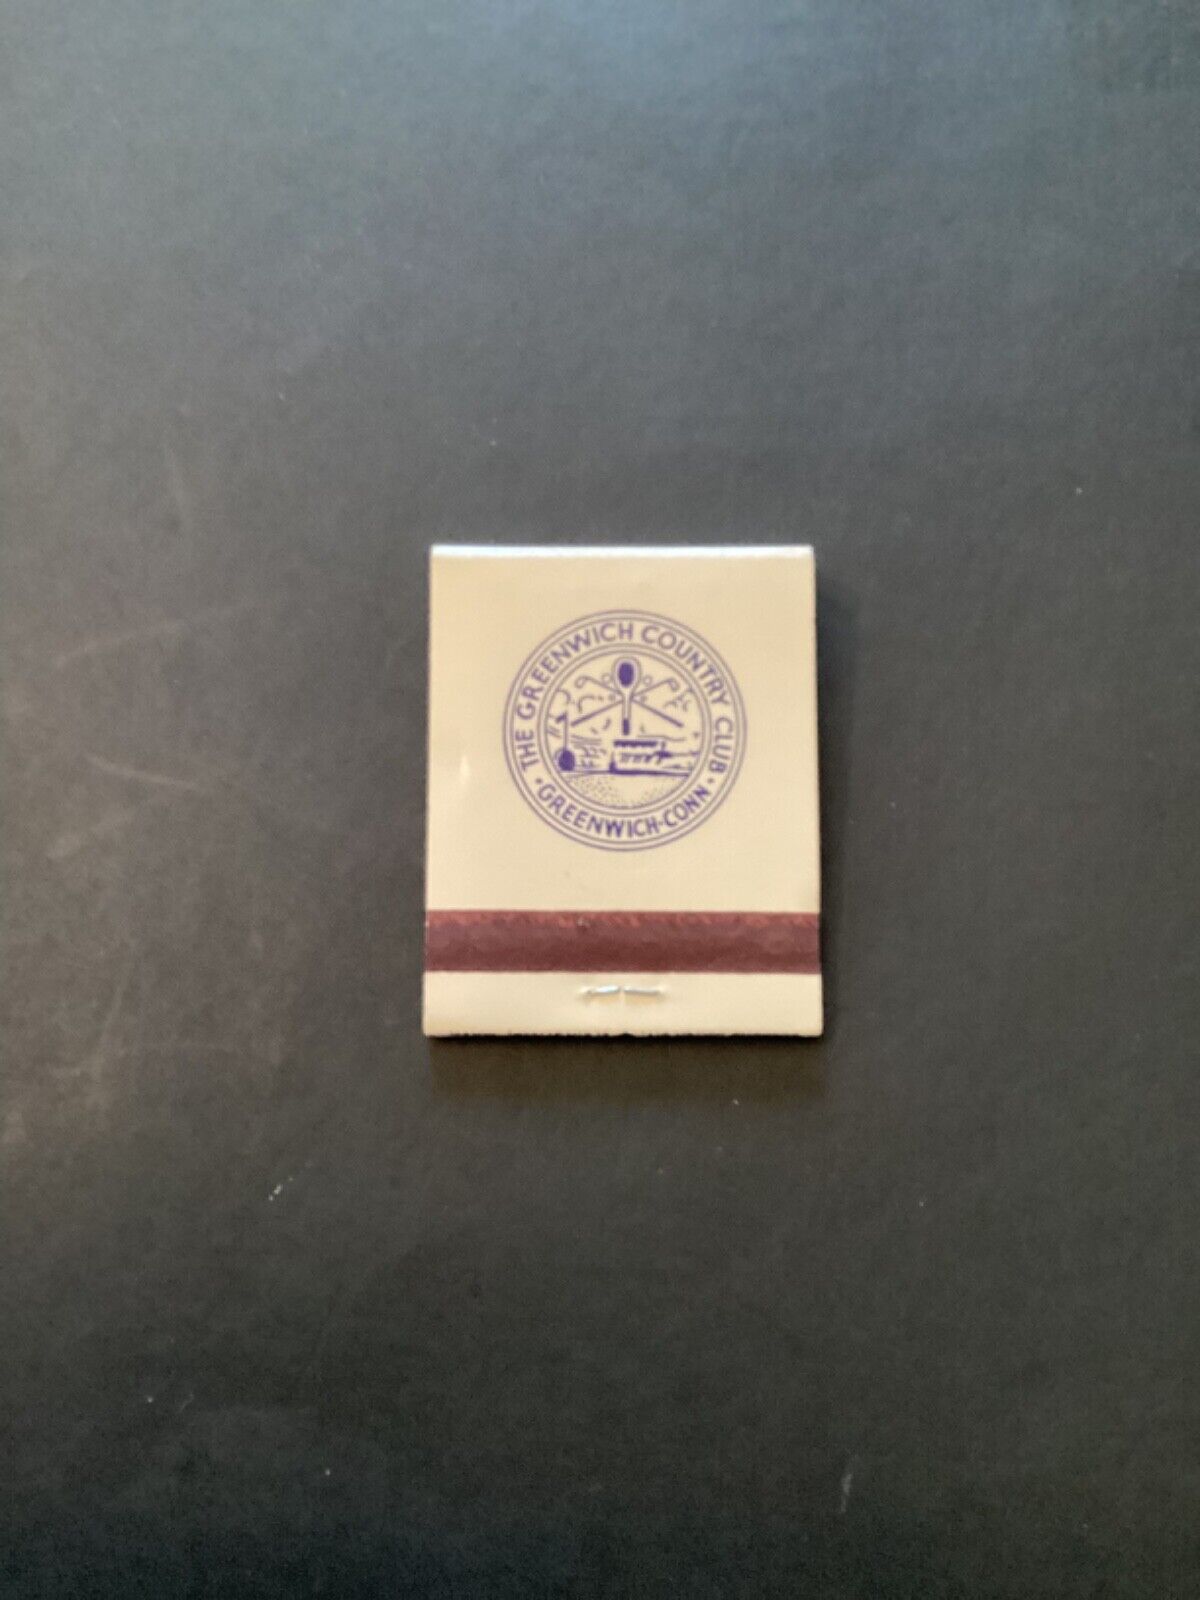 Vintage Greenwich Country Club Greenwich Connecticut Advertising Matchbook